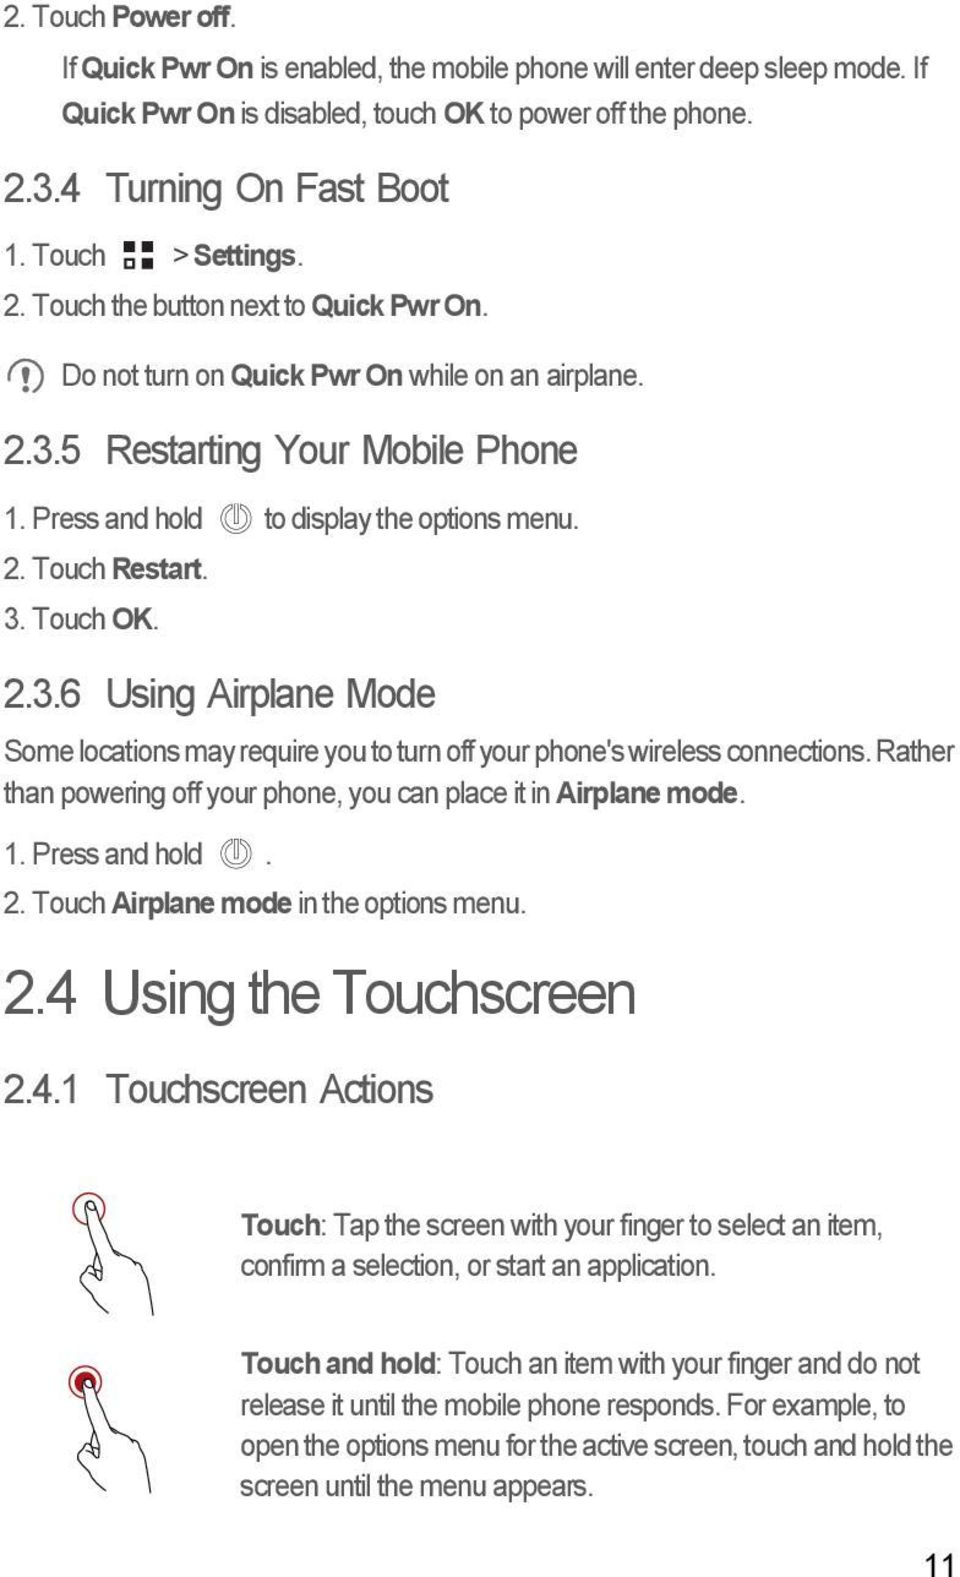 3. Touch OK. 2.3.6 Using Airplane Mode Some locations may require you to turn off your phone's wireless connections. Rather than powering off your phone, you can place it in Airplane mode. 1.